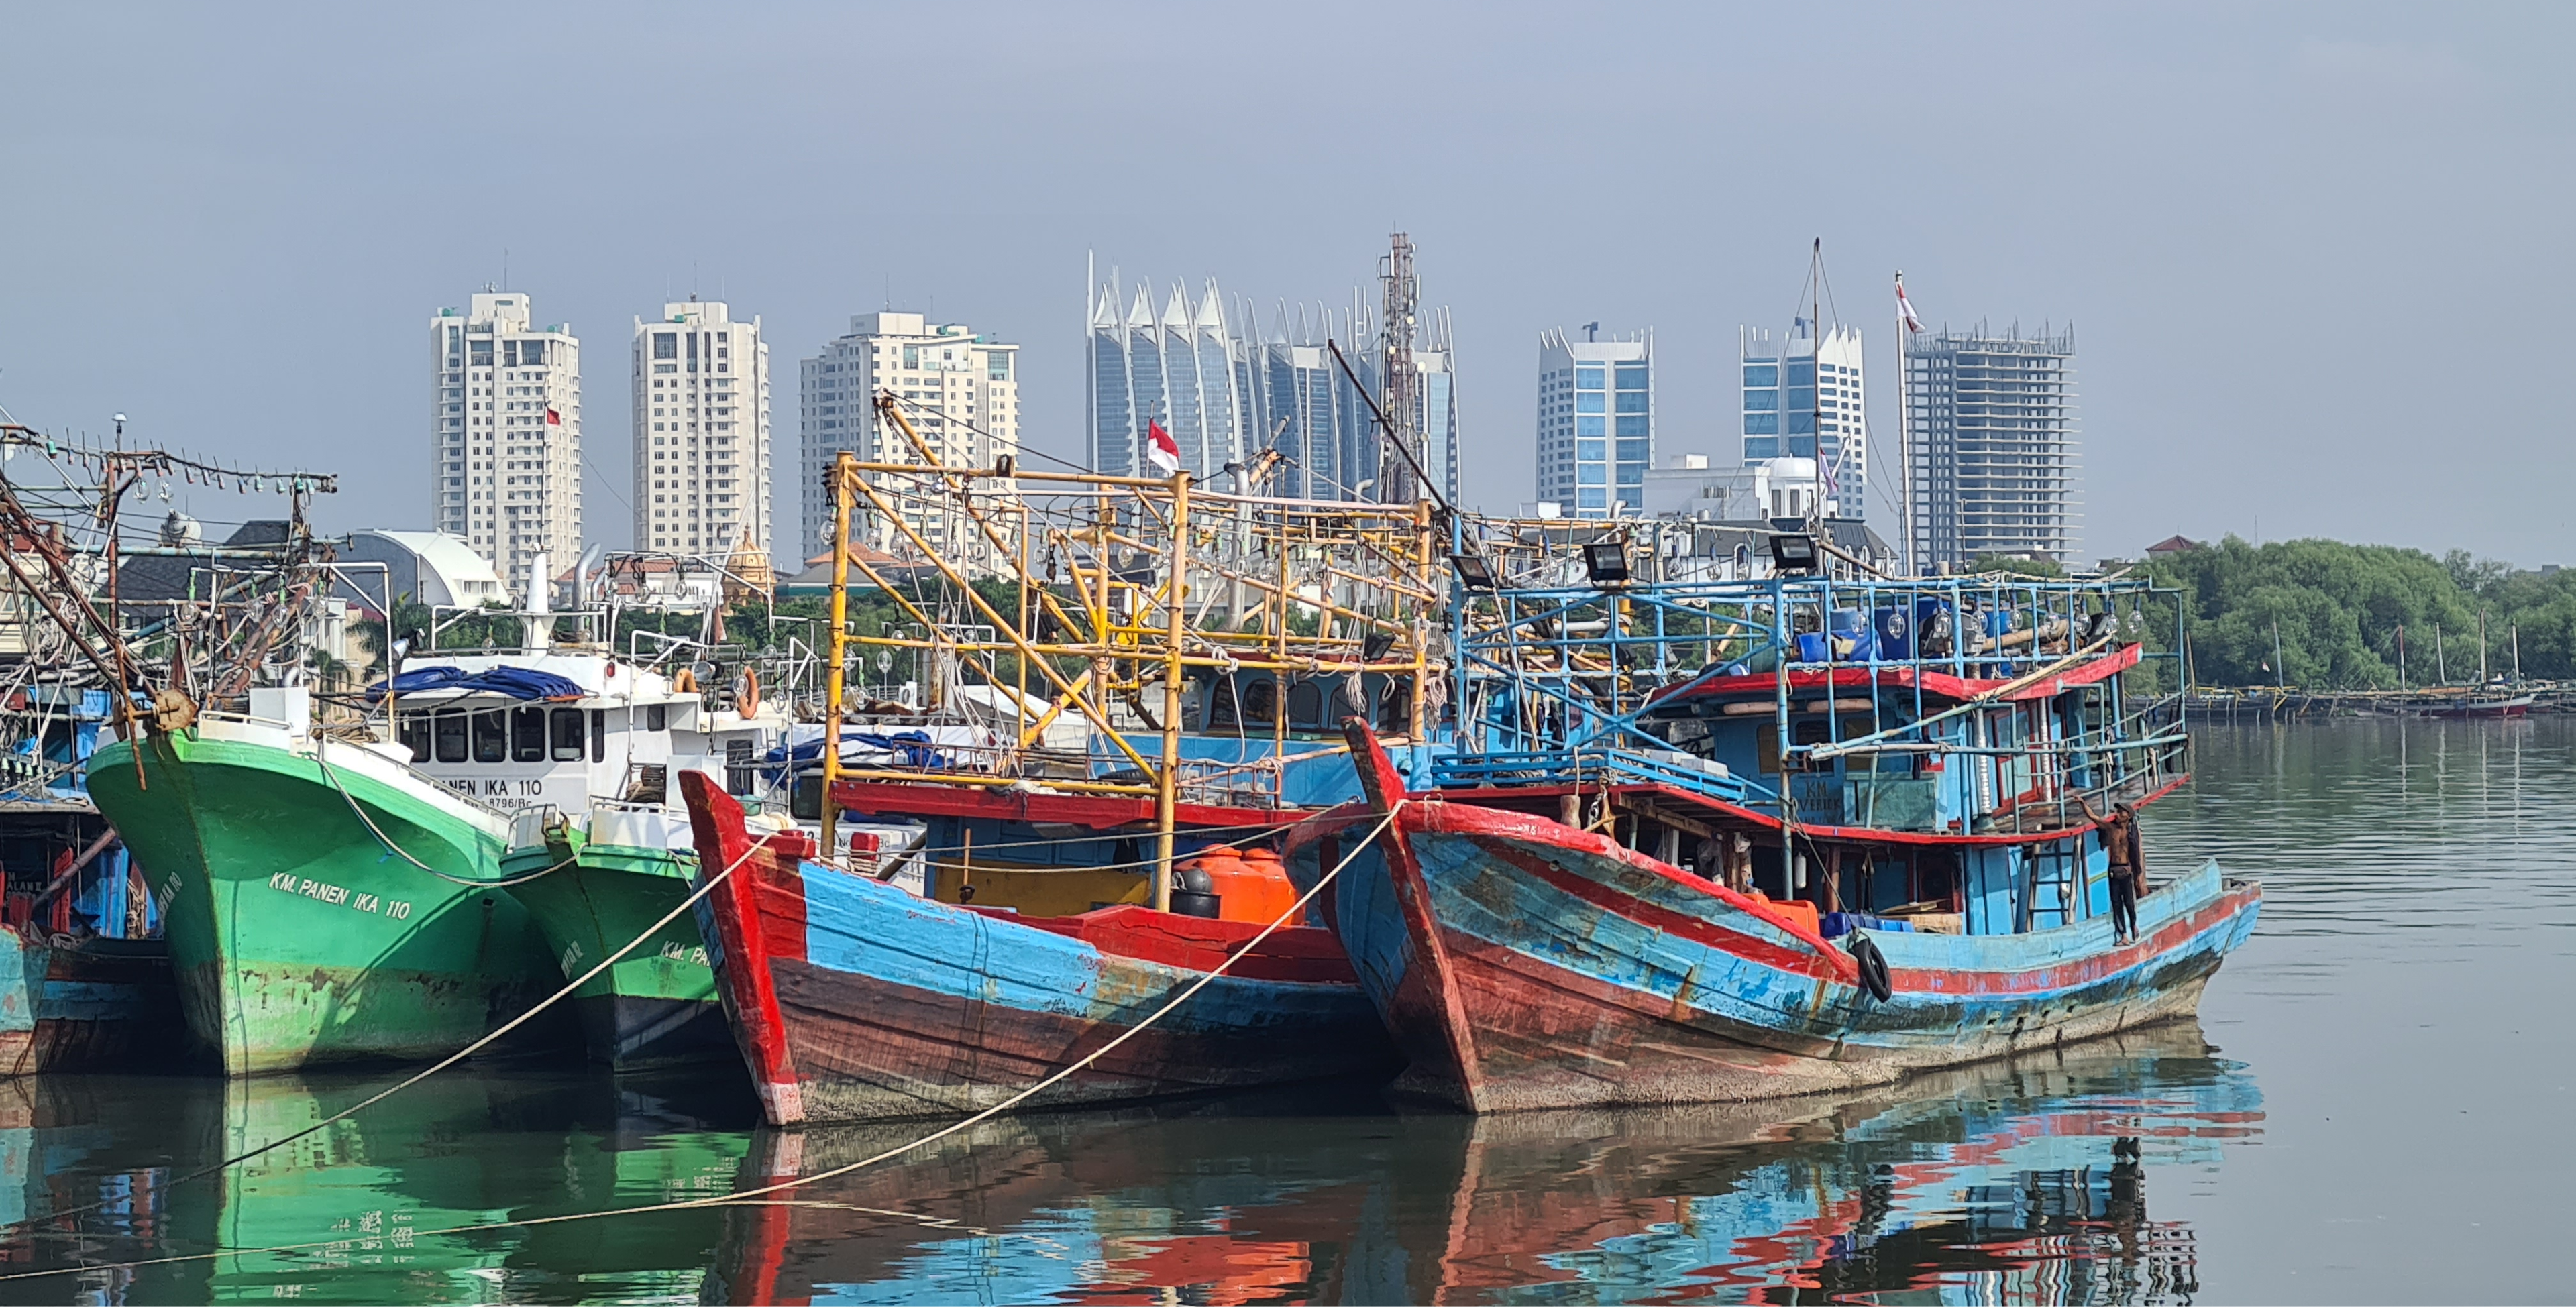 Indonesian fisher boats with modern high-rise buildings in the distance